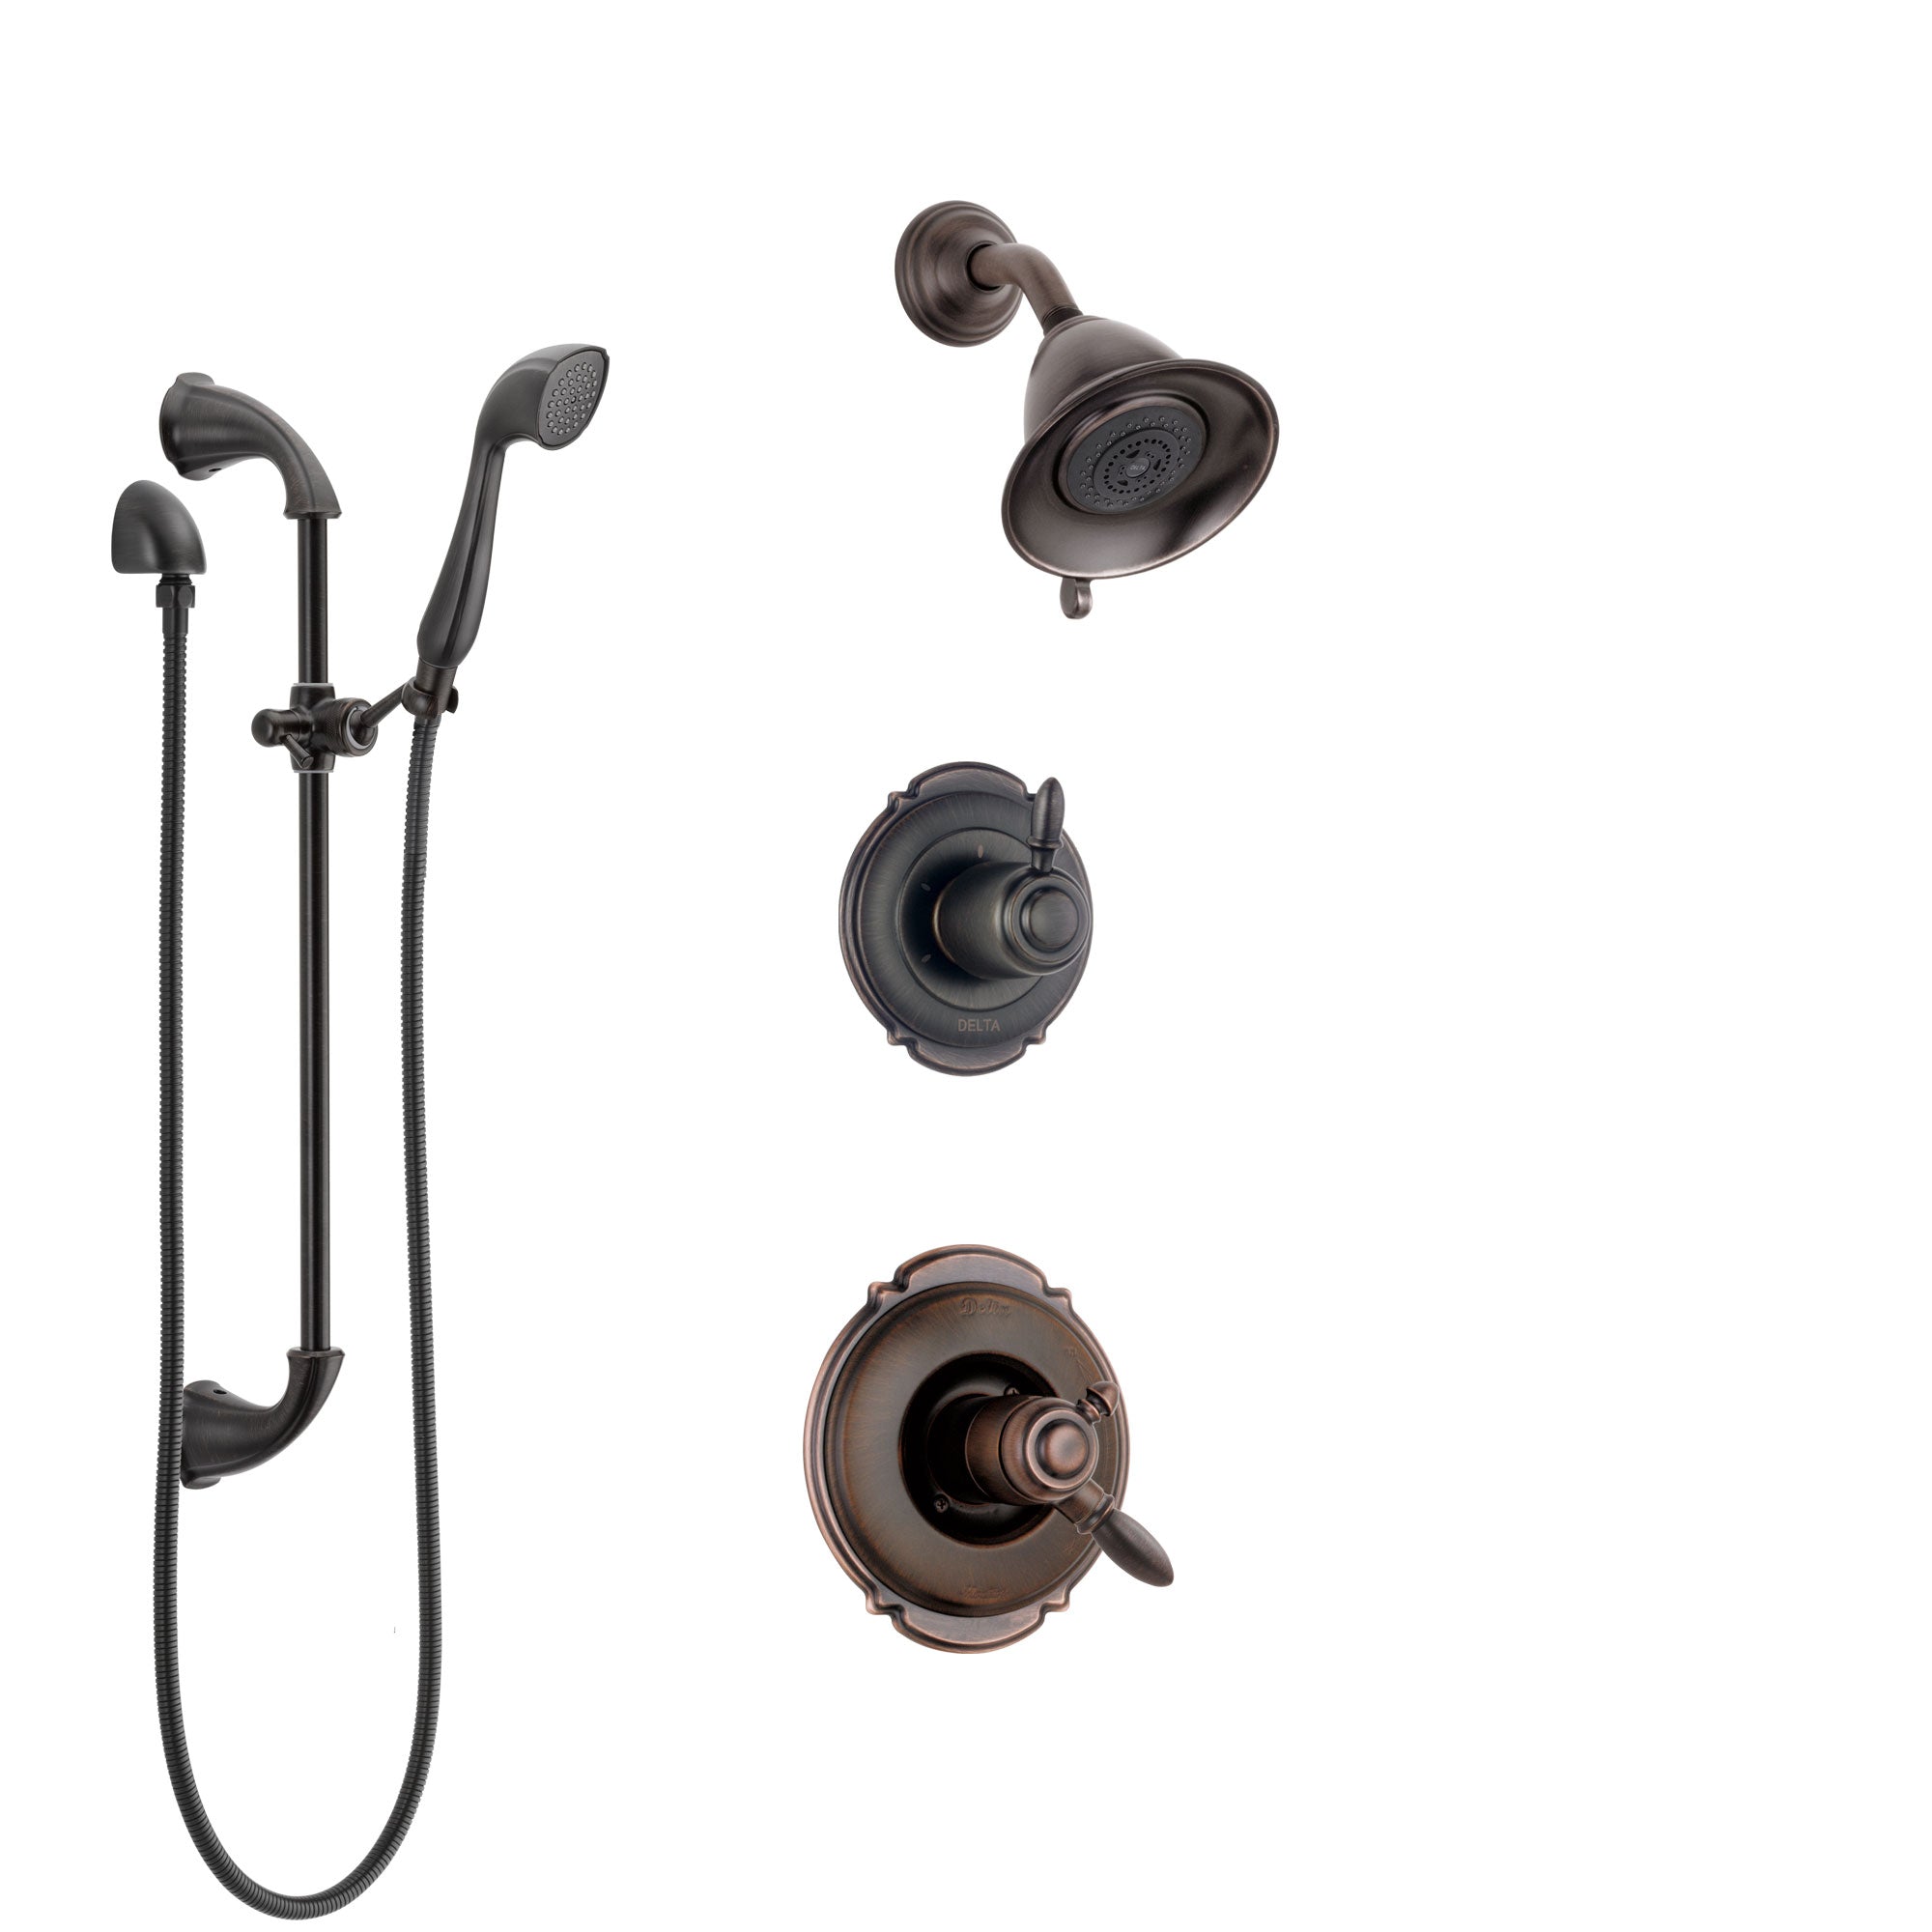 Delta Victorian Venetian Bronze Shower System with Dual Control Handle, 3-Setting Diverter, Showerhead, and Hand Shower with Slidebar SS172551RB4